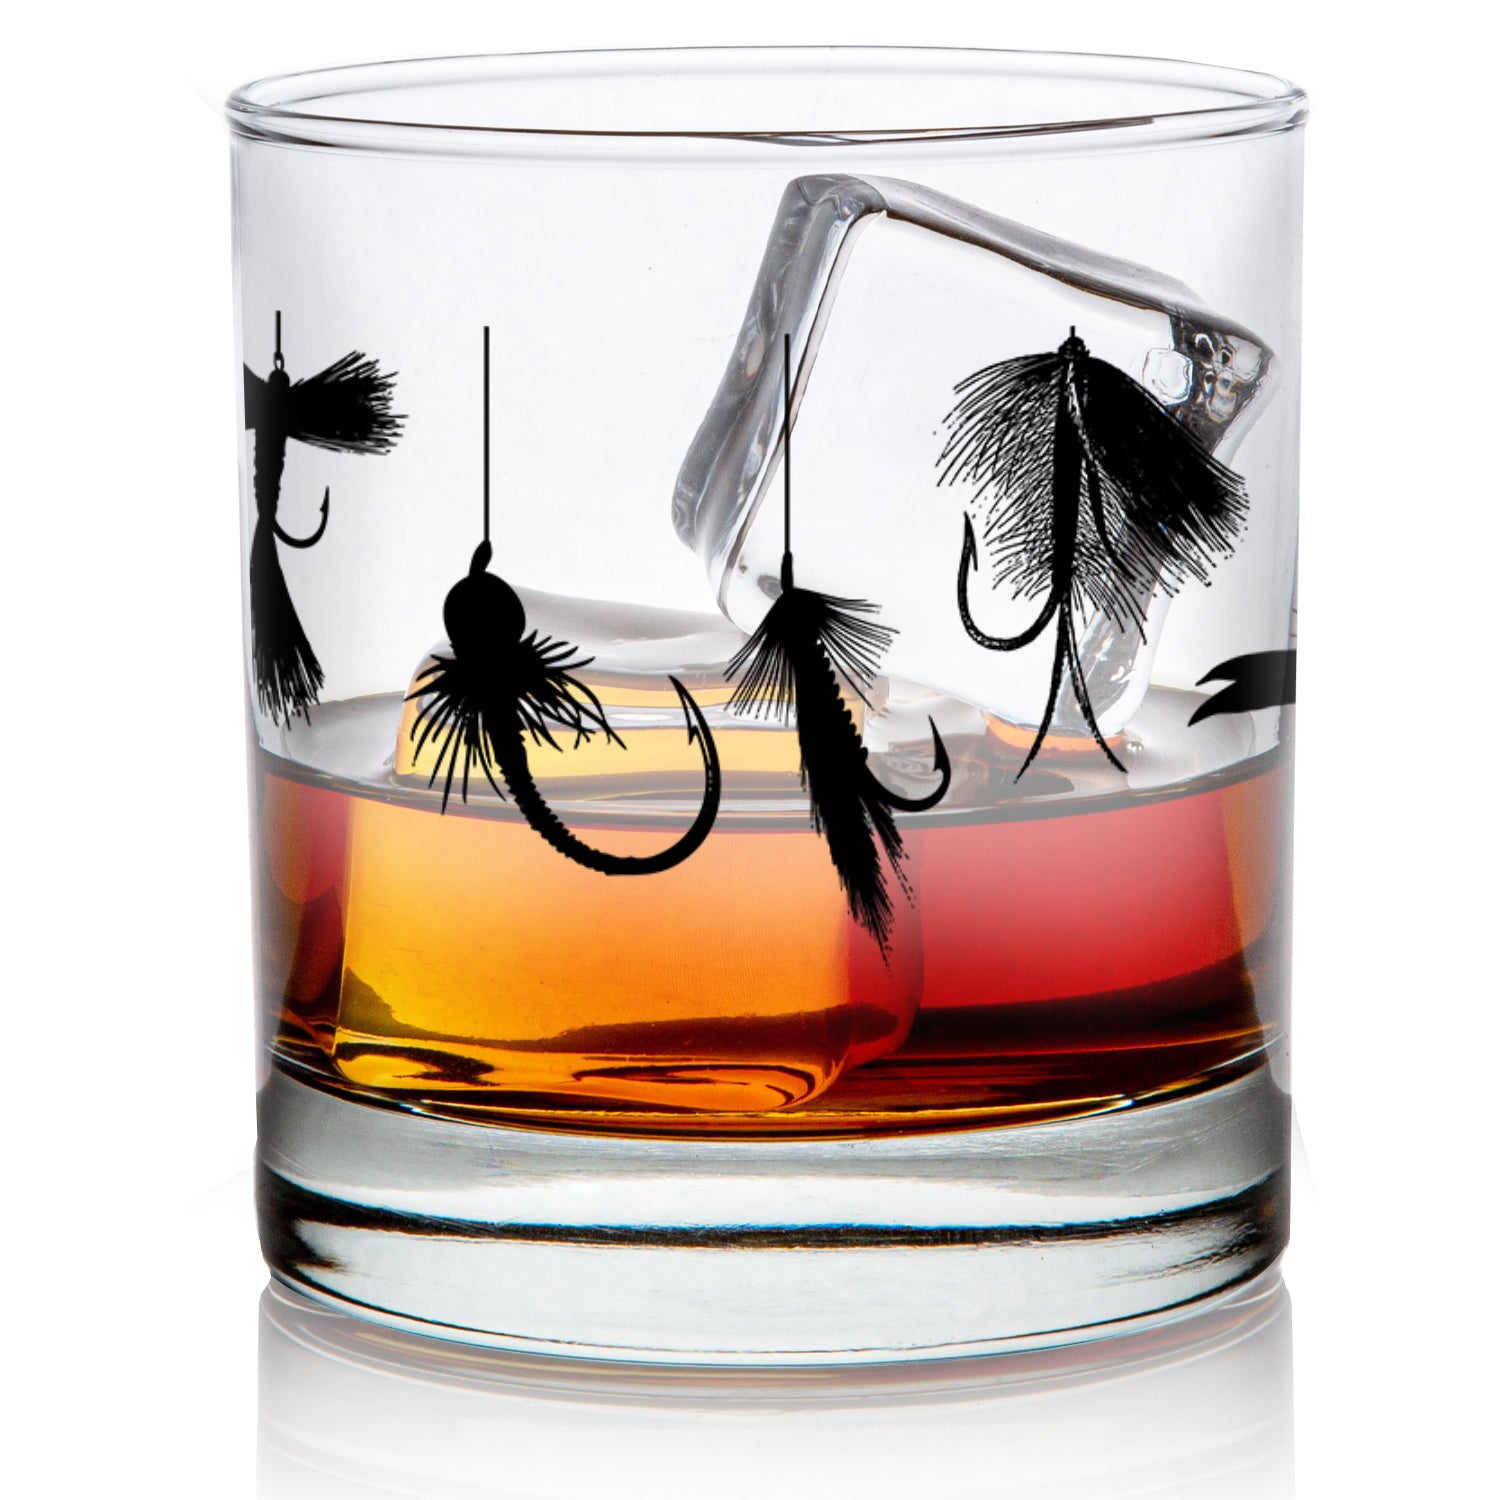  Fly Fishing - Whiskey Rocks Glass - Unique Flyfishing Themed  Gifts for Fishermen - 10.25 Ounce : Handmade Products